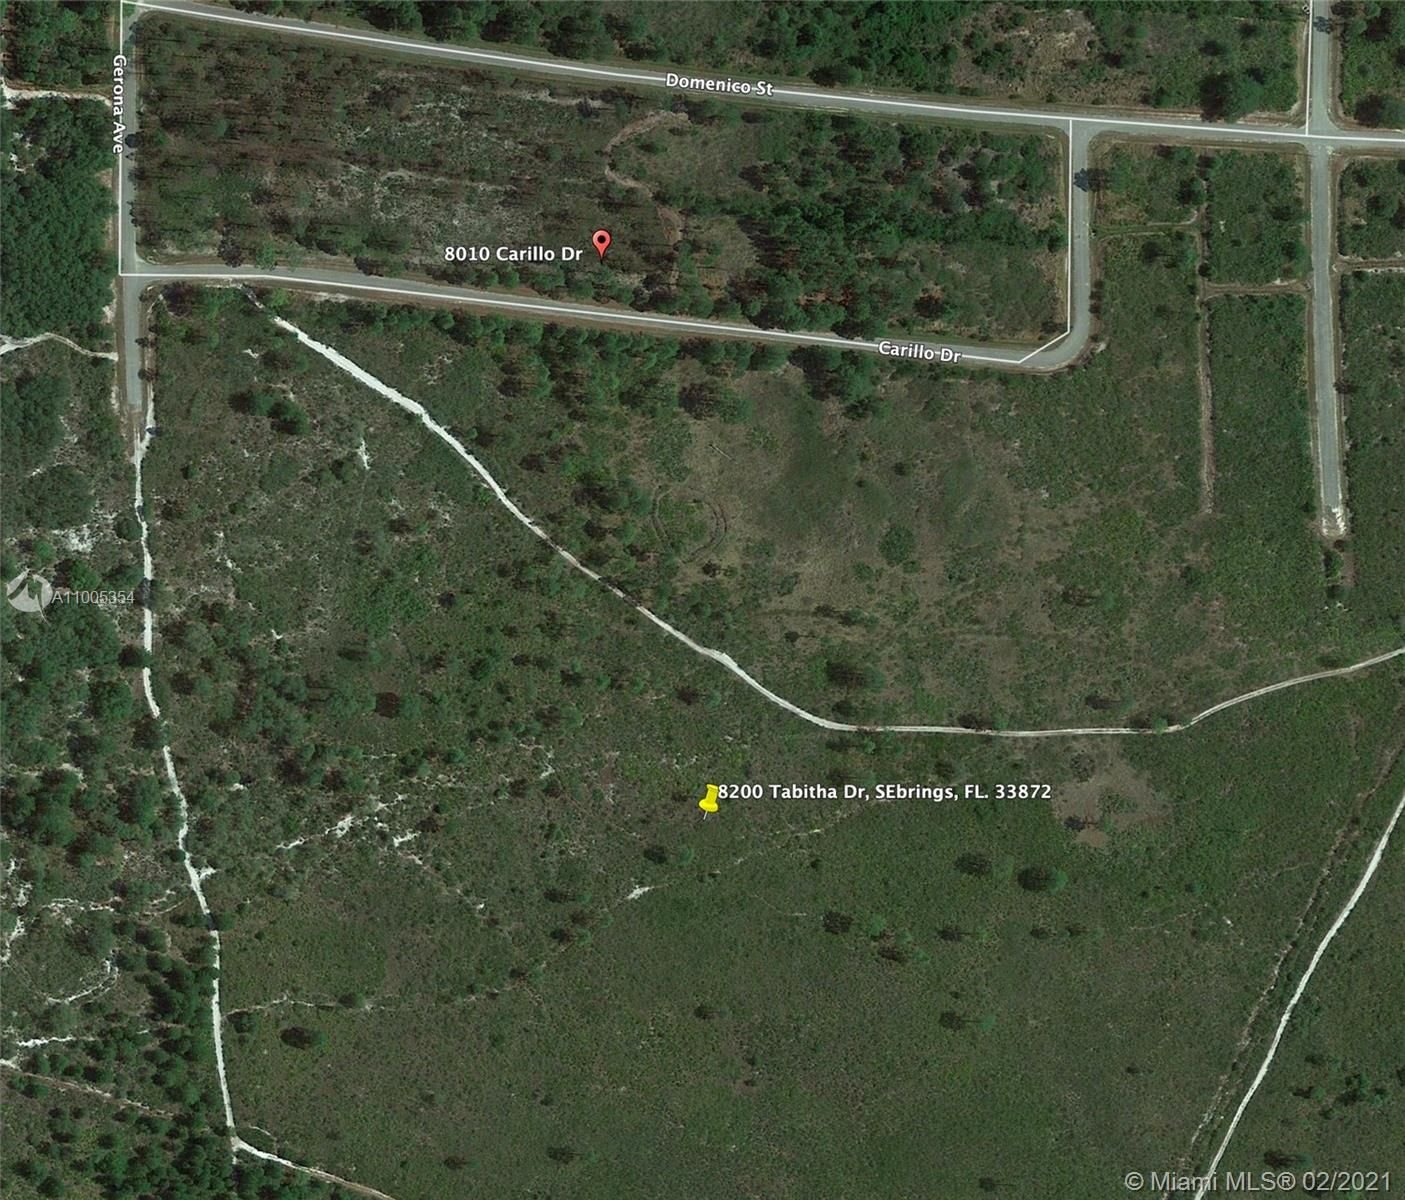 Real estate property located at 8200 Tabitha, Highlands County, Sebring, FL